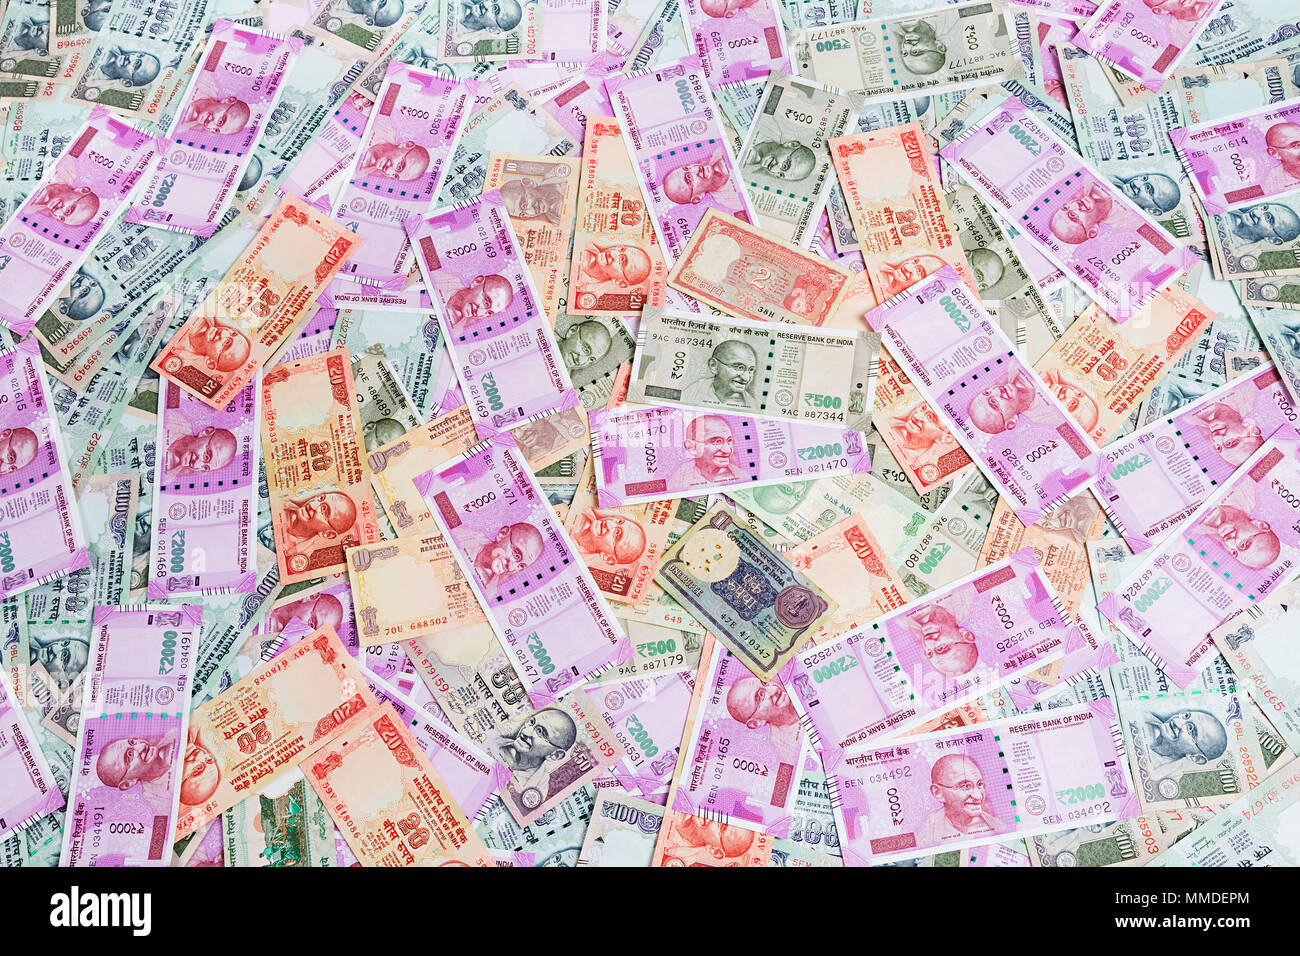 Abundance Money Variations of Indian Currency Notes Cash Banking Finance Stock Photo